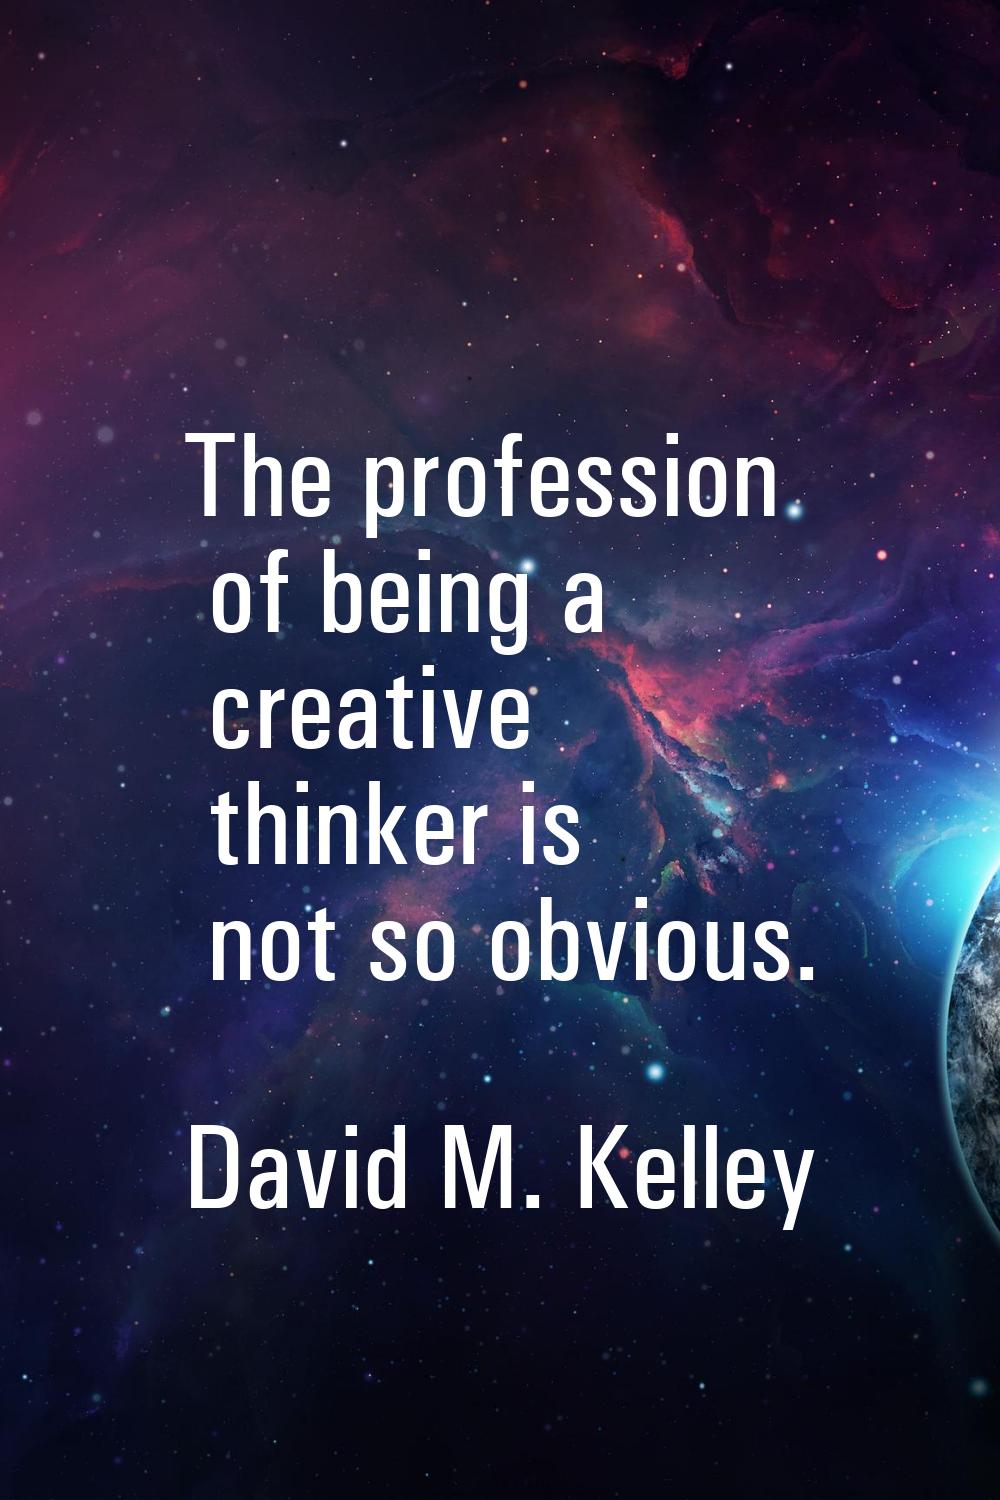 The profession of being a creative thinker is not so obvious.